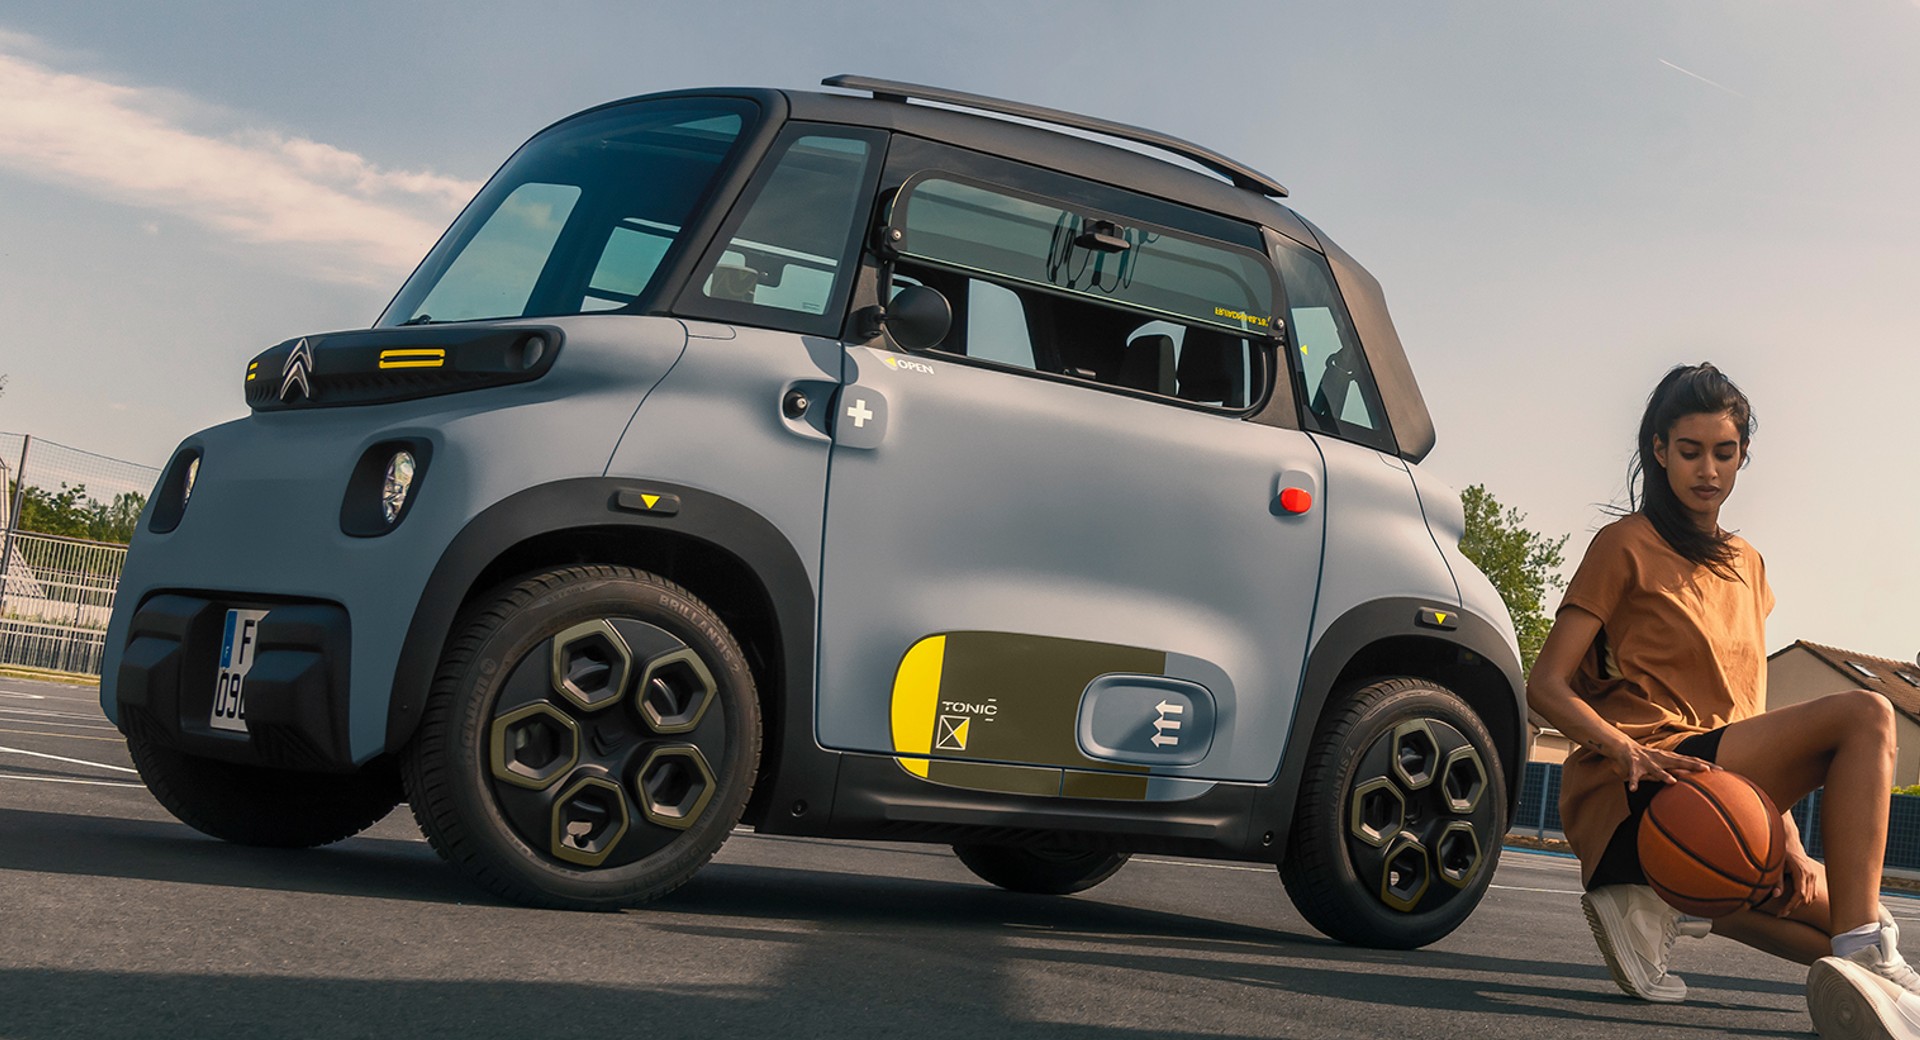 Citroën unveils the Ami, a super-cheap electric car you can buy